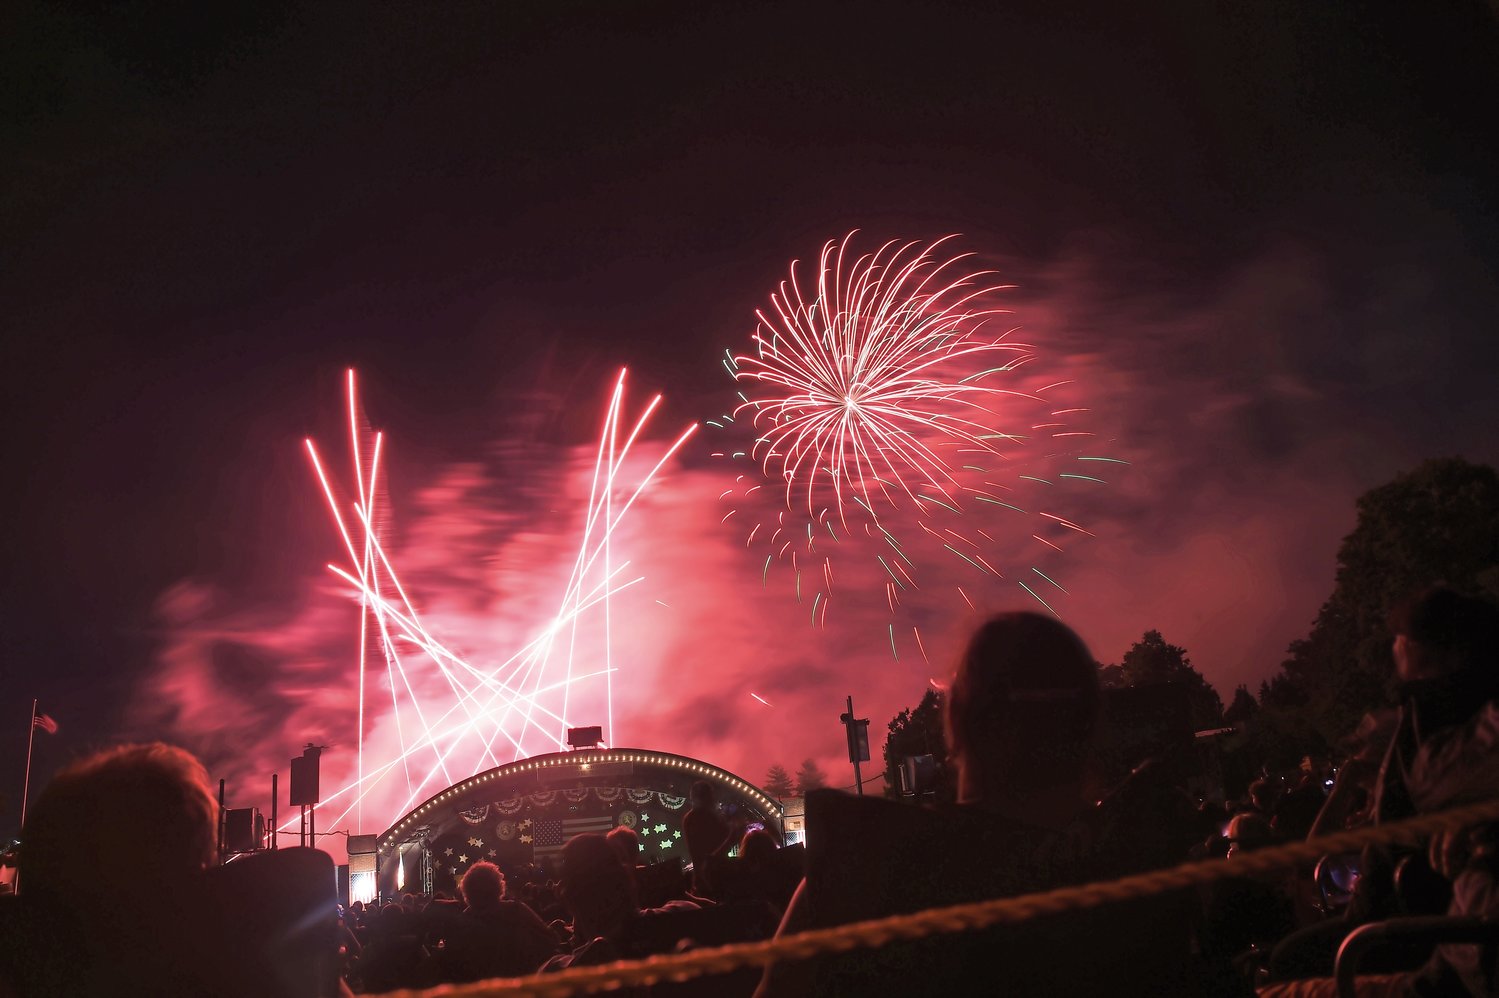 There will be no July Fourth fireworks at Eisenhower Park, as in years past.